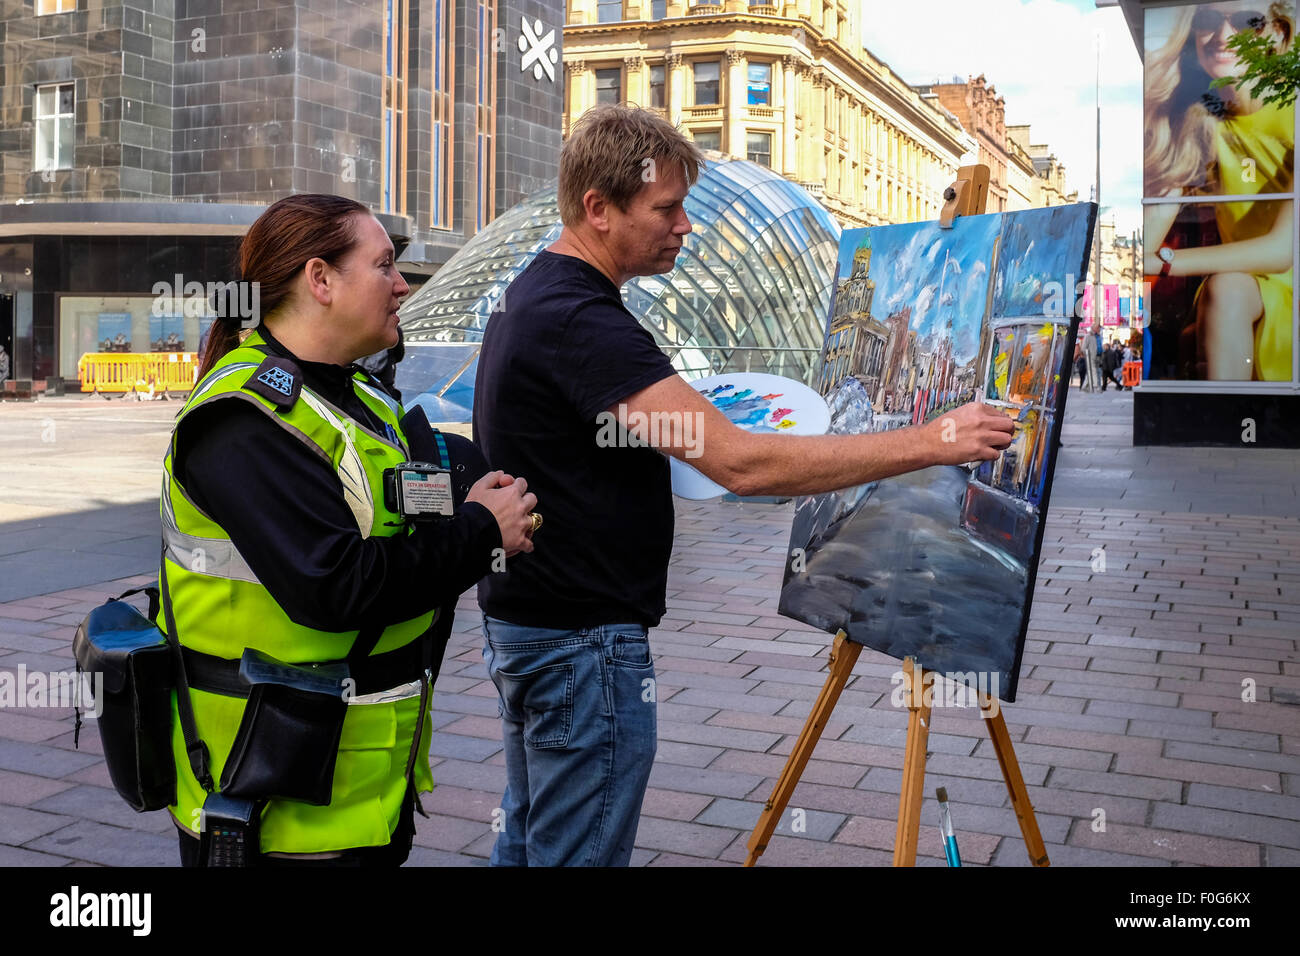 Glasgow, Scotland, UK. 15th Aug, 2015. Almost 150 artists came to Glasgow to take part in the 'Rapid Painter' art competition with the aim being to make a painting capturing the spirit of Glasgow city, completed in 1 day. The artists attracted a lot of curiosity and interest from tourists and locals, when they set up in various locations about the city. All the completed works will go on exhibition on Sunday 16 August at the Royal Concert Hall, Sauchiehall Street, Glasgow when many of the paintings will be for sale. Credit:  Findlay/Alamy Live News Stock Photo